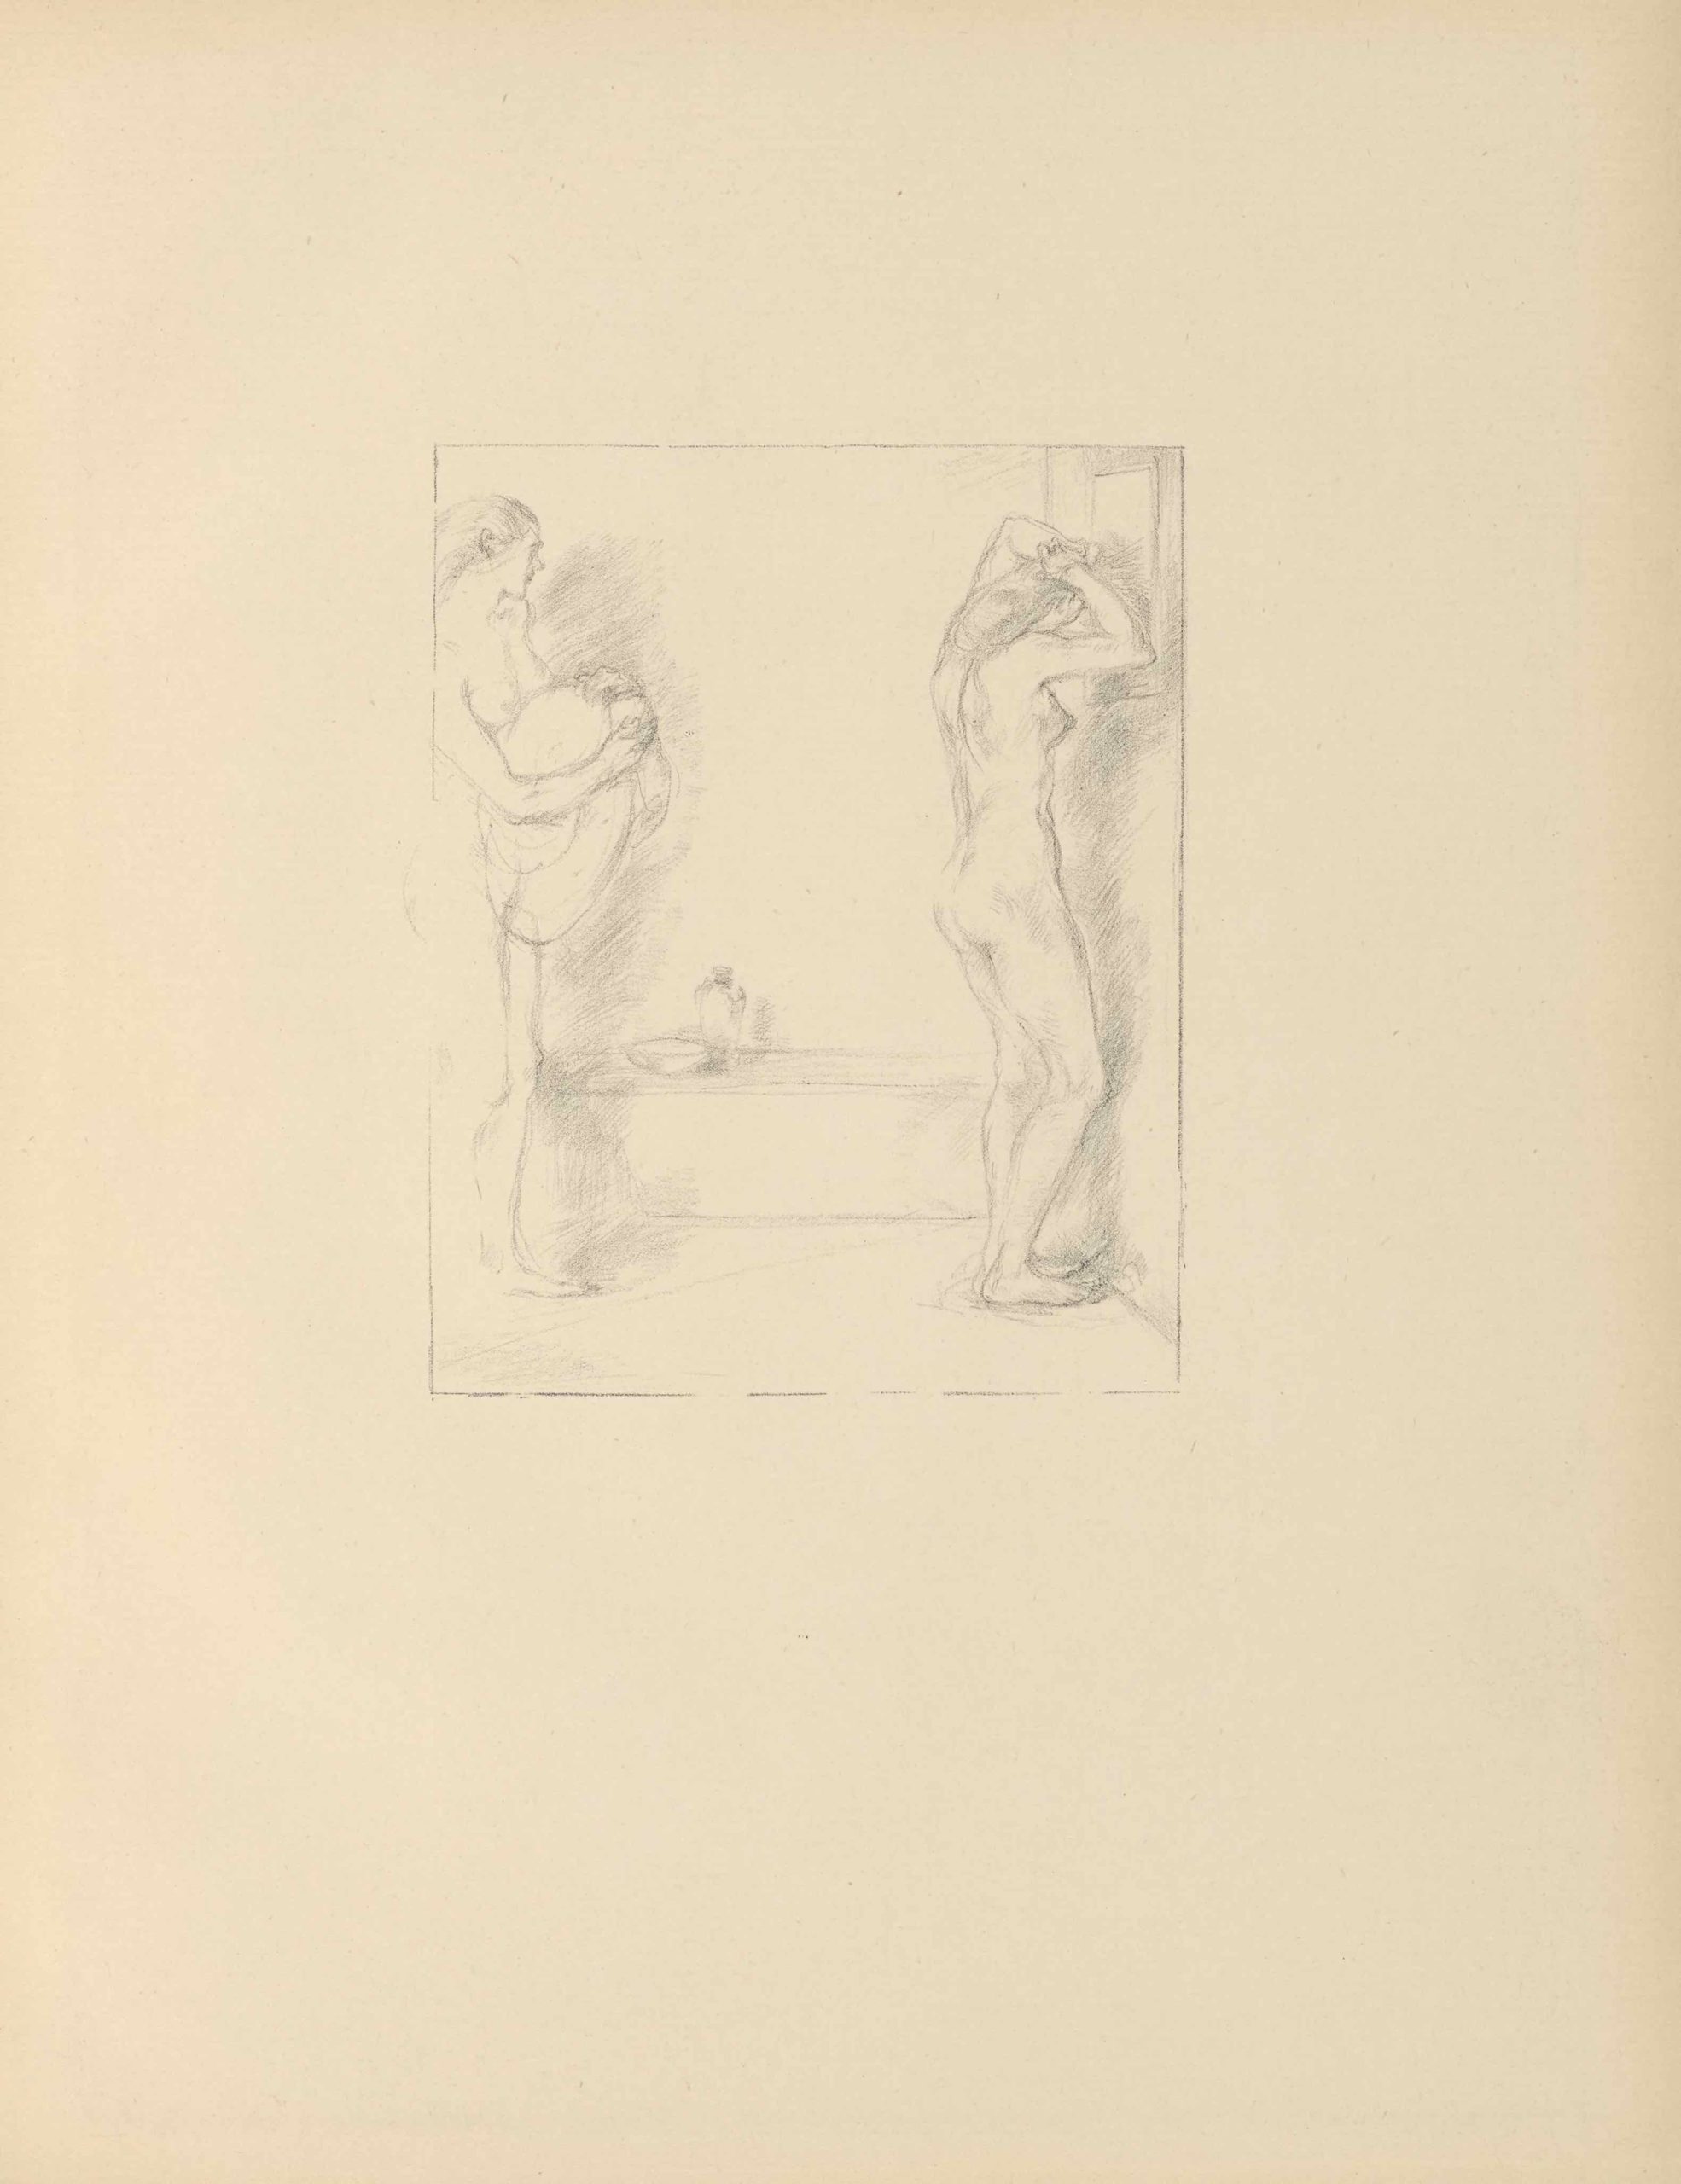 The lithograph, rendered in soft grey tones, is printed in portrait orientation, in a thin-lined rectangular border. The image depicts two naked women in a compressed bathroom. Emerging from the extreme left, a woman faces right, her face in profile, holding a towel in her arms. To her right, her shadow is faintly visible along the wall and floor. She looks towards a woman on the right side of the image. This woman also faces right, looking in a mirror hung on the wall, arms raised to pin up her hair. Her face is turned away from the viewer, and her shadow is cast upon the wall in front of her. Behind the figures is a low bath with a basin and ewer.